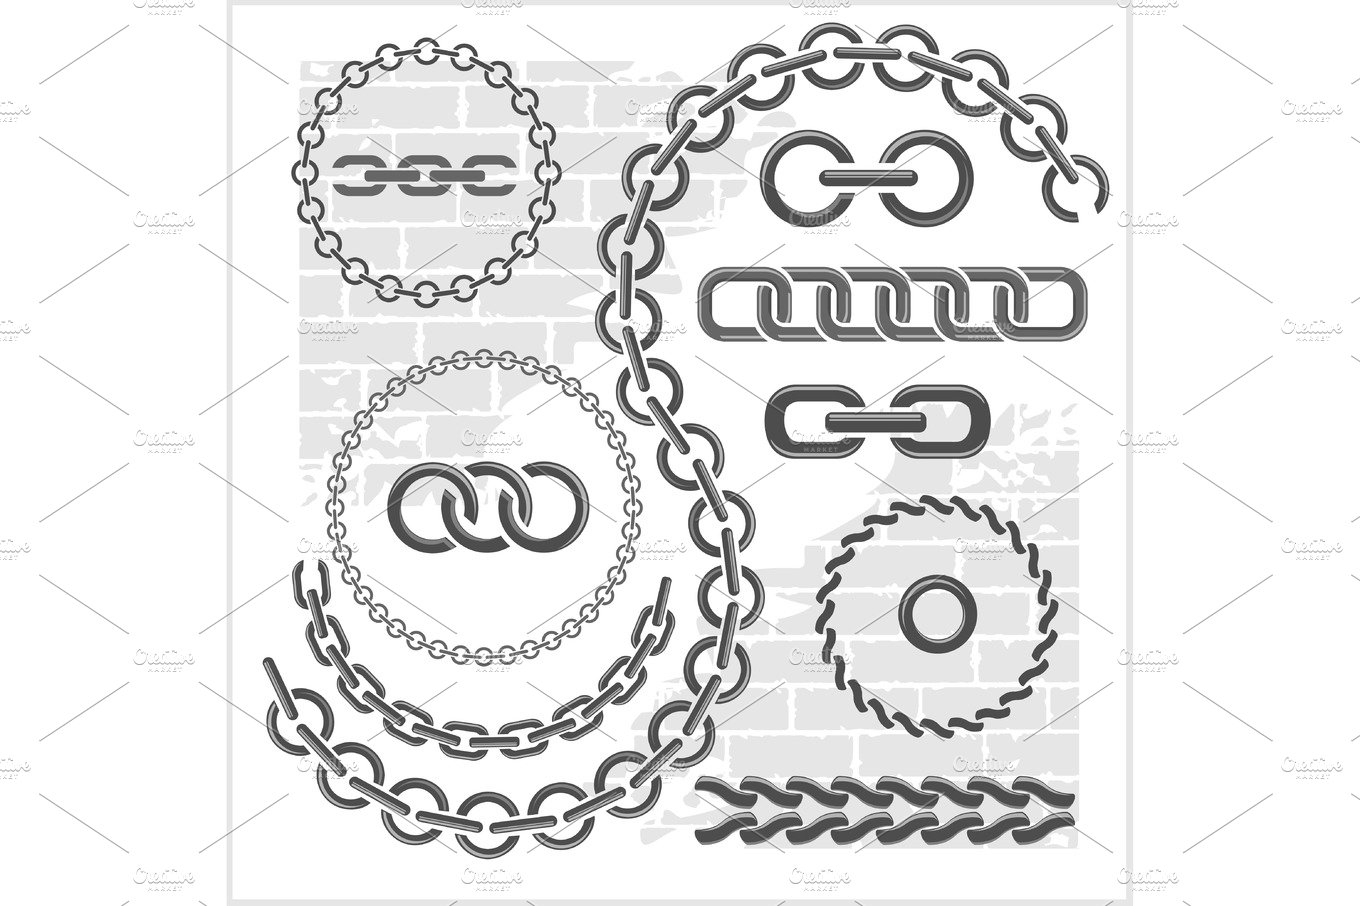 Chains set - icons, parts, circles of chains. cover image.